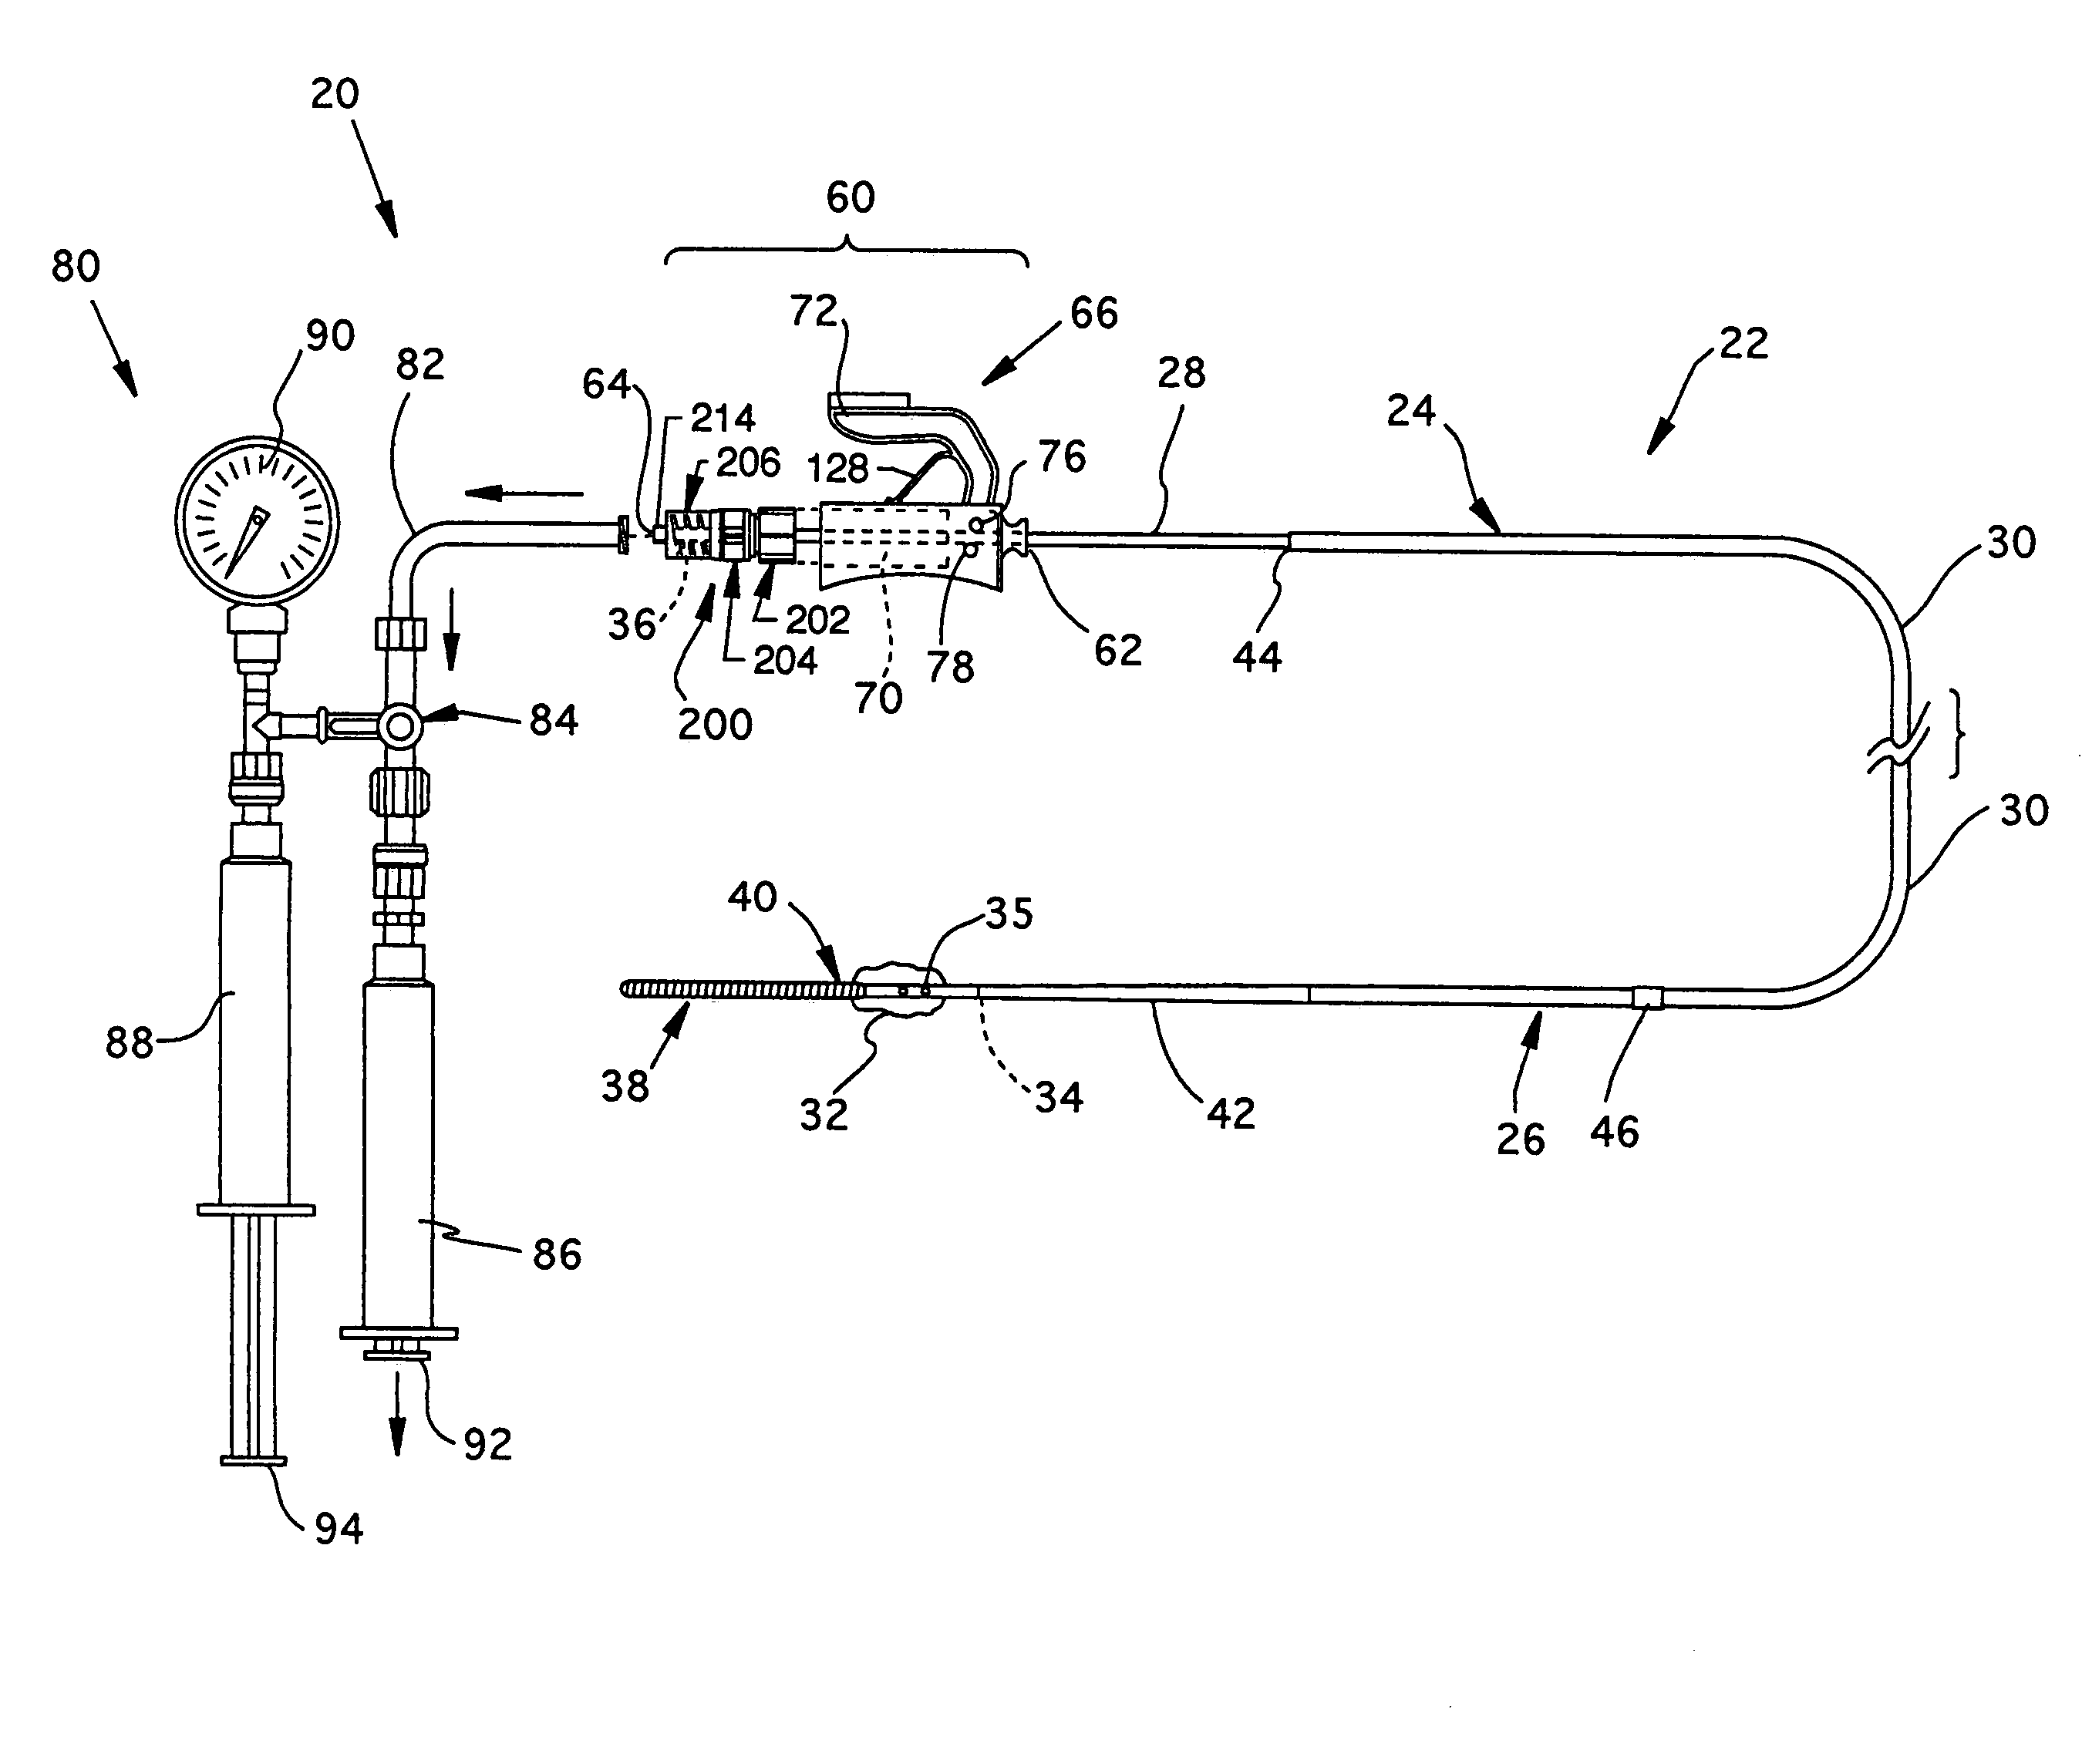 Gas inflation/evacuation system and sealing system incorporating a compression sealing mechanism for guidewire assembly having occlusive device